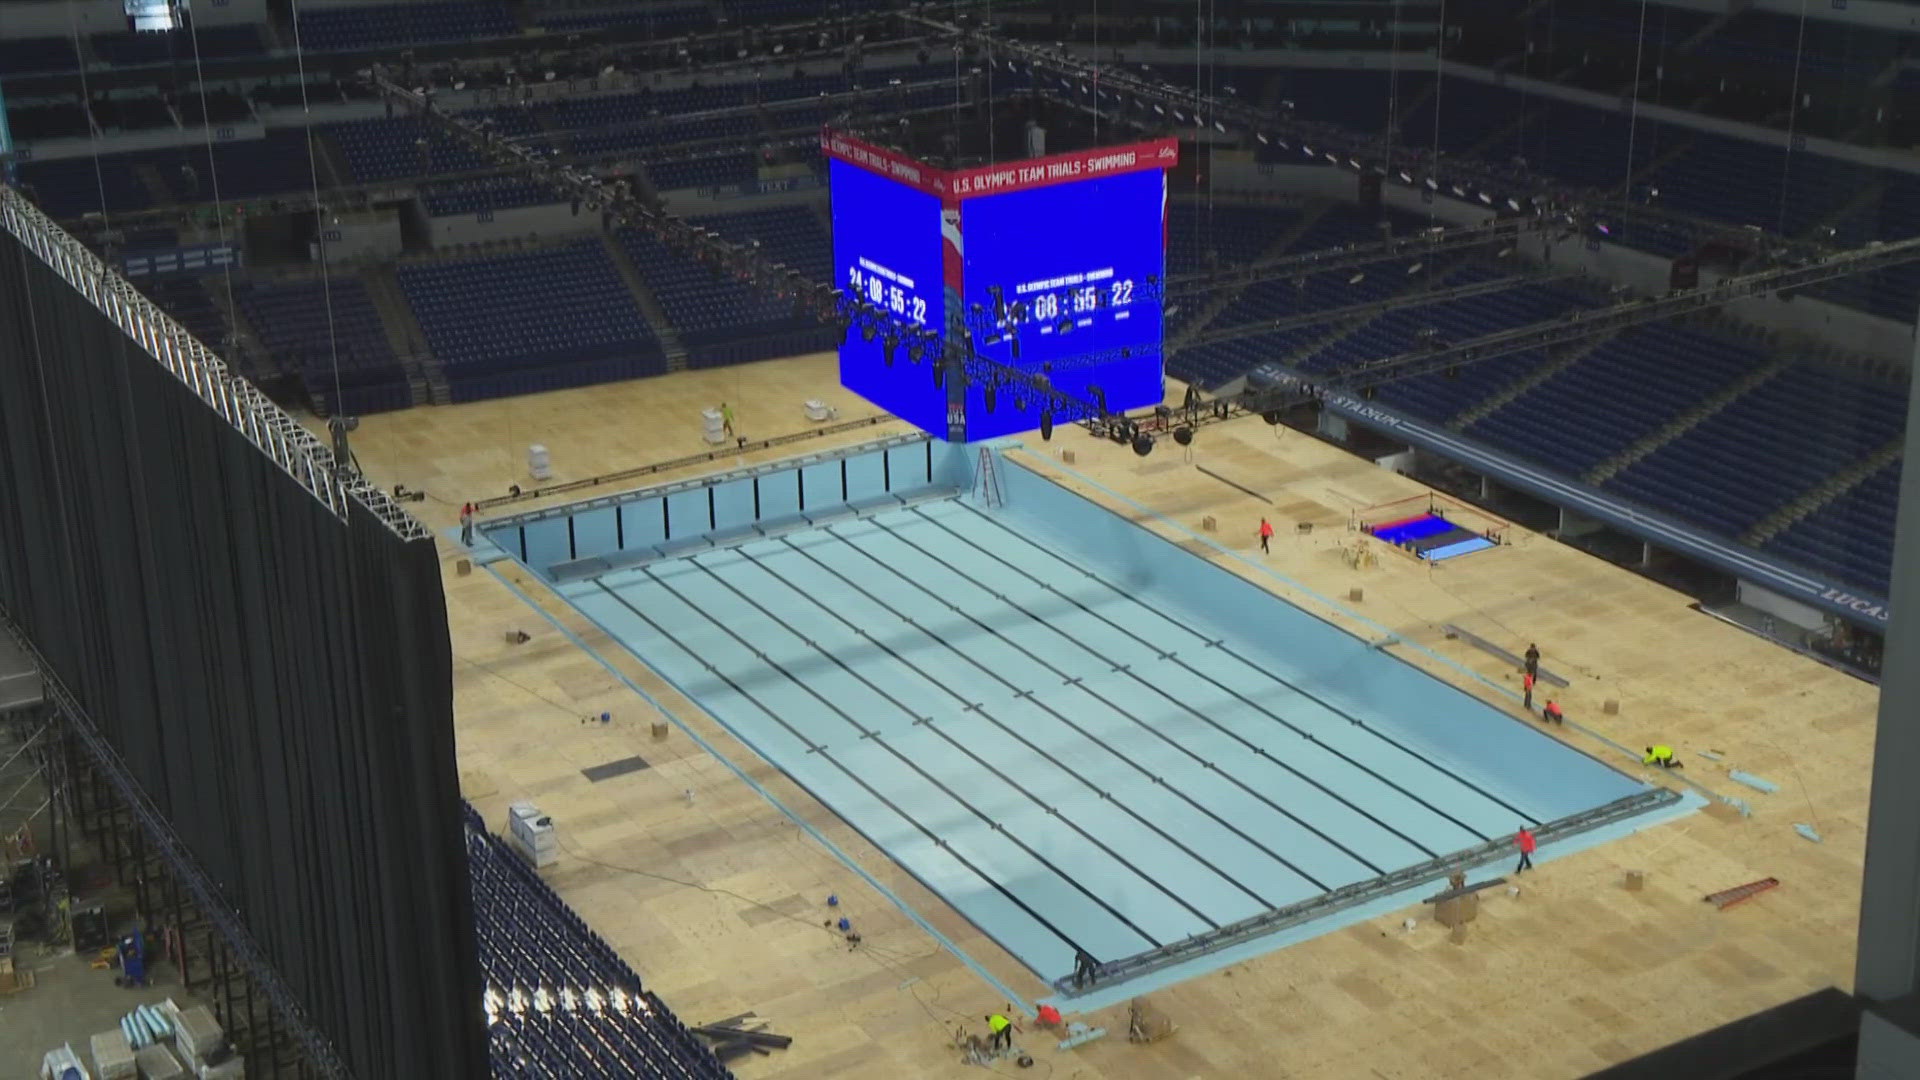 The trials will determine who represents Team USA this summer in Paris. And As we speak the pools are being assembled inside Lucas Oil Stadium.